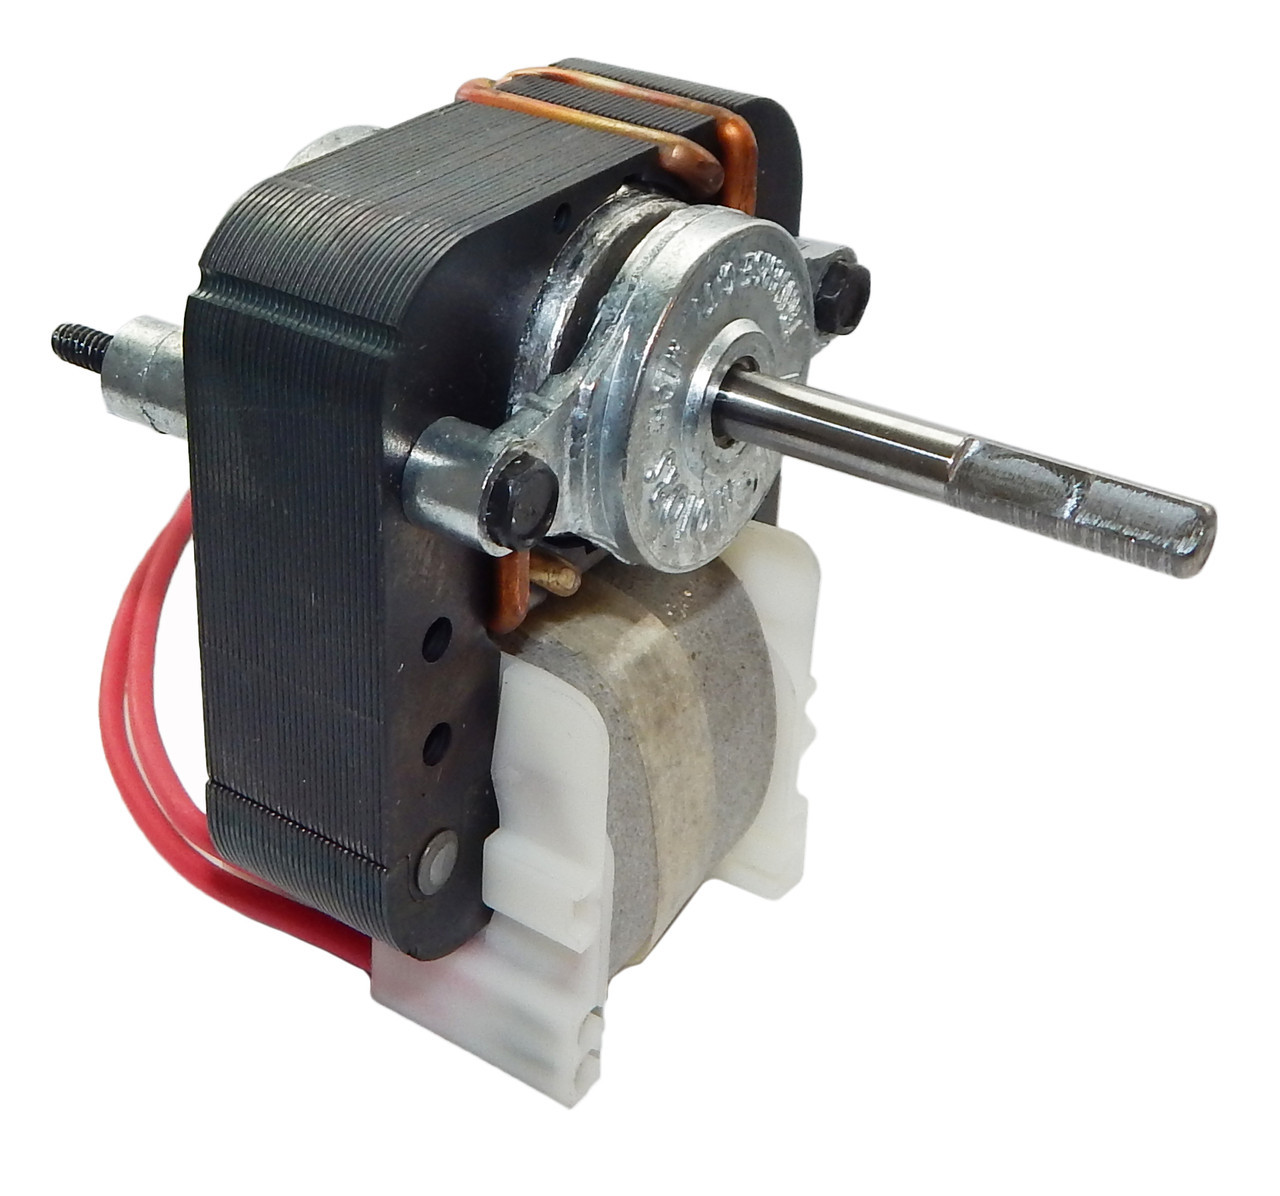 87547 Broan/Nutone C-Frame Replacement Motor; 1.22 Amps, 3/4" stack 120 Volts